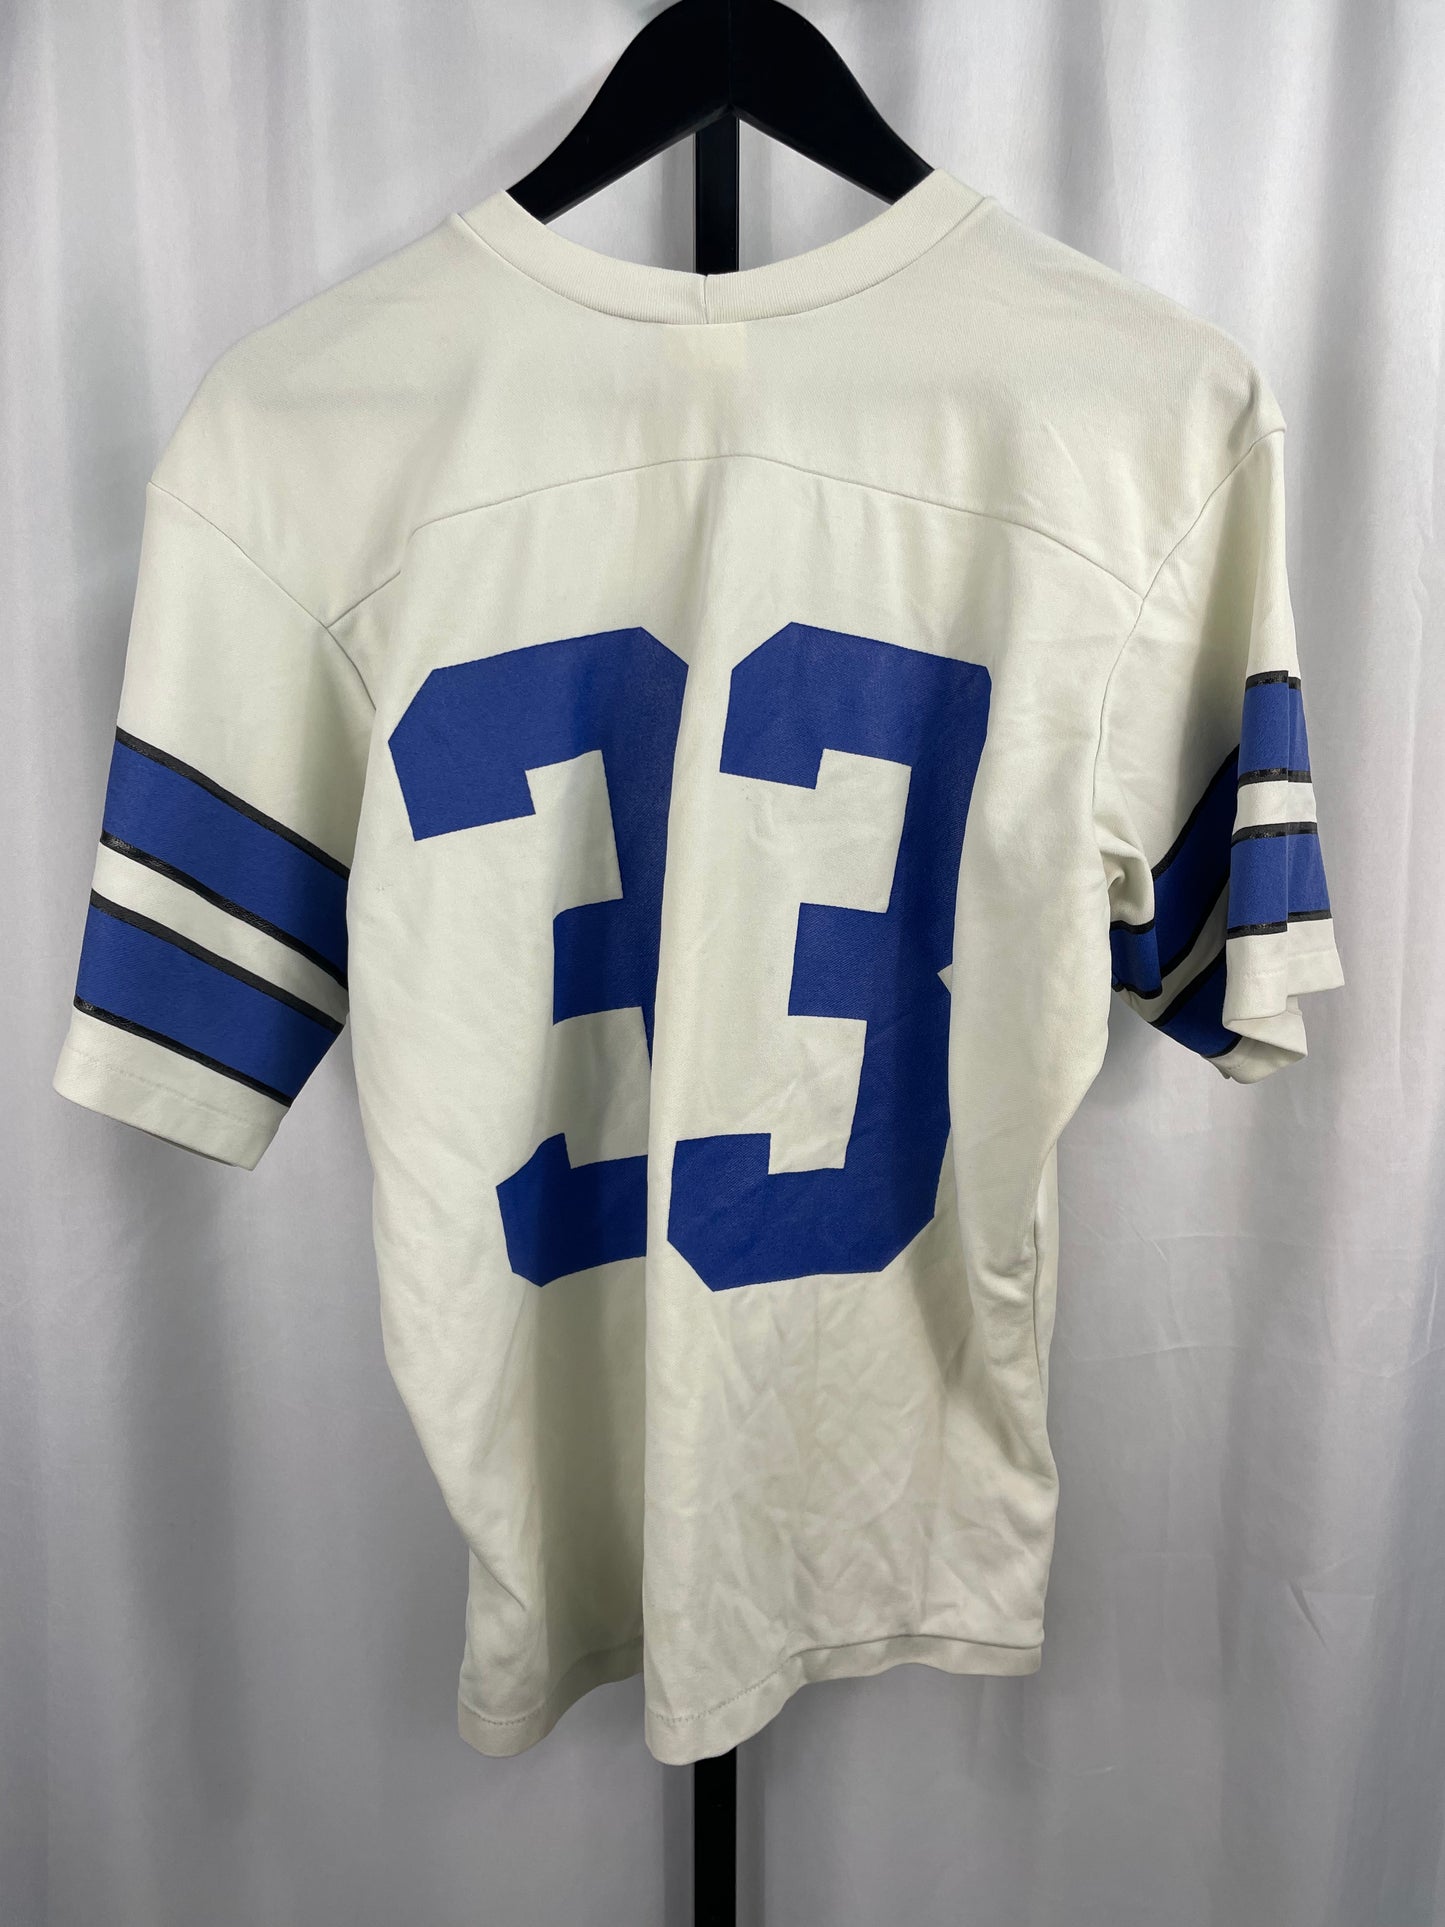 Load image into Gallery viewer, VTG Dallas Cowboys 33 Jersey Tee Sz S/M
